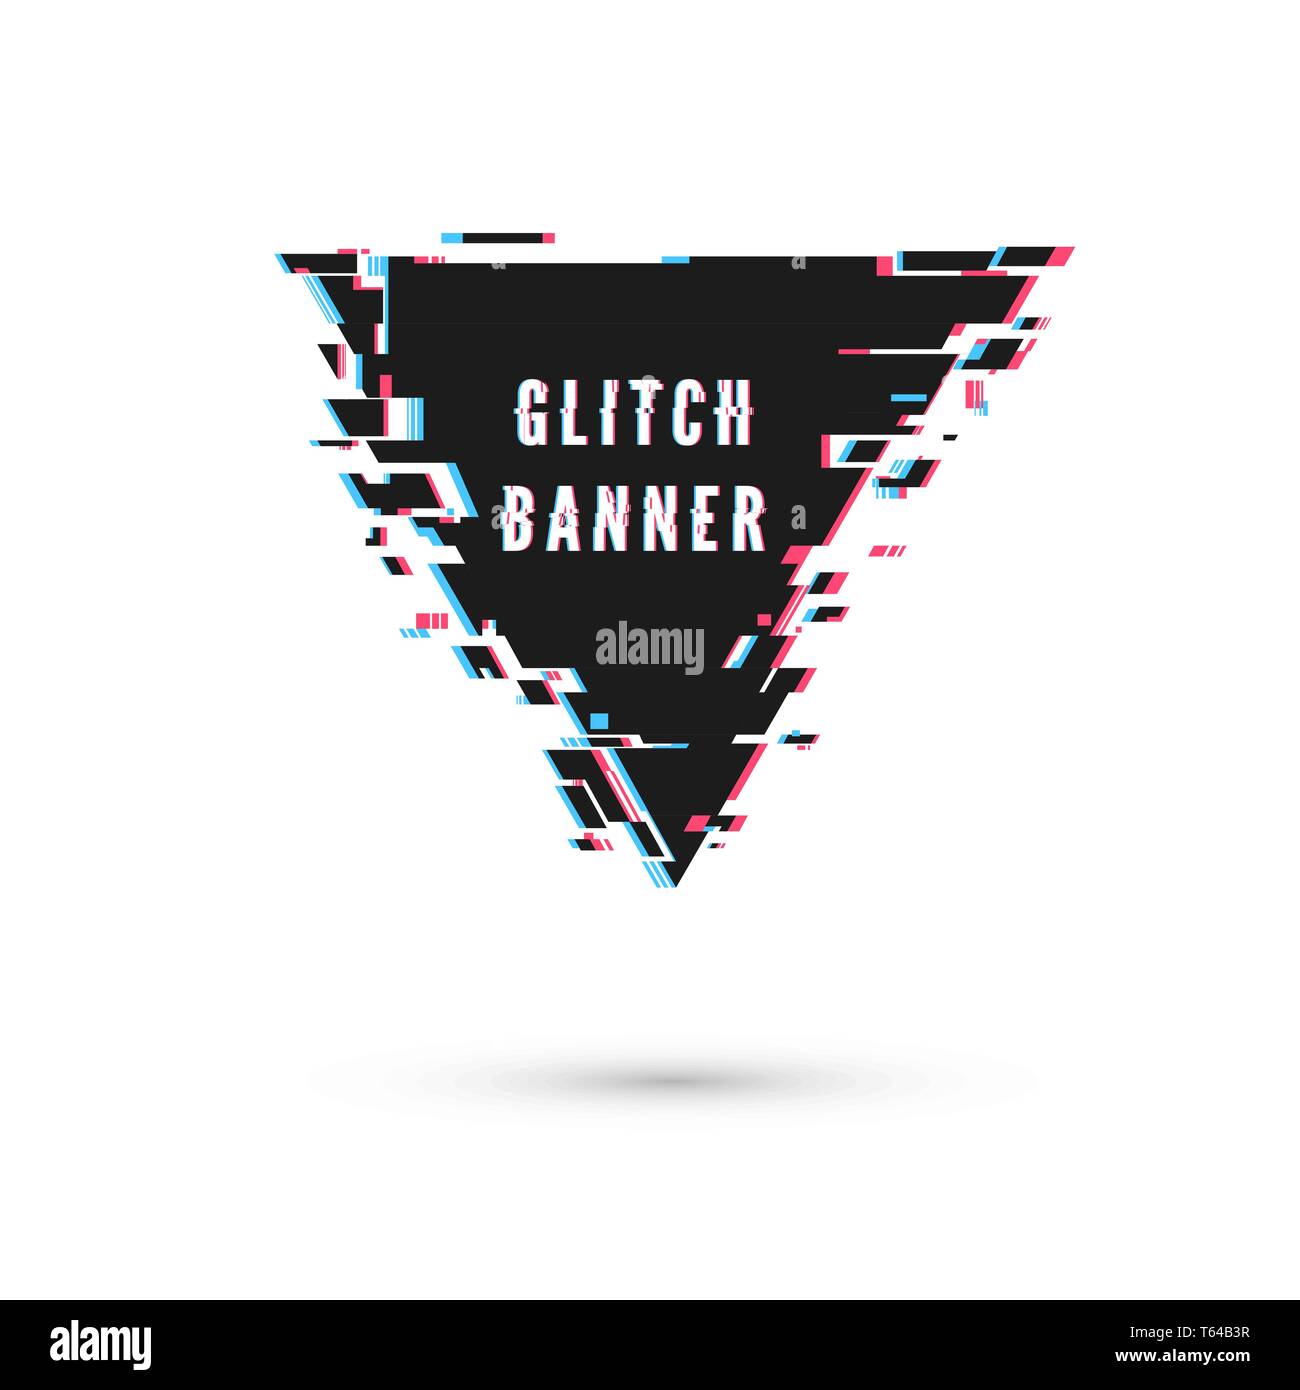 Triangular banner form in distorted glitch style. Vector illustration isolated on white background Stock Vector